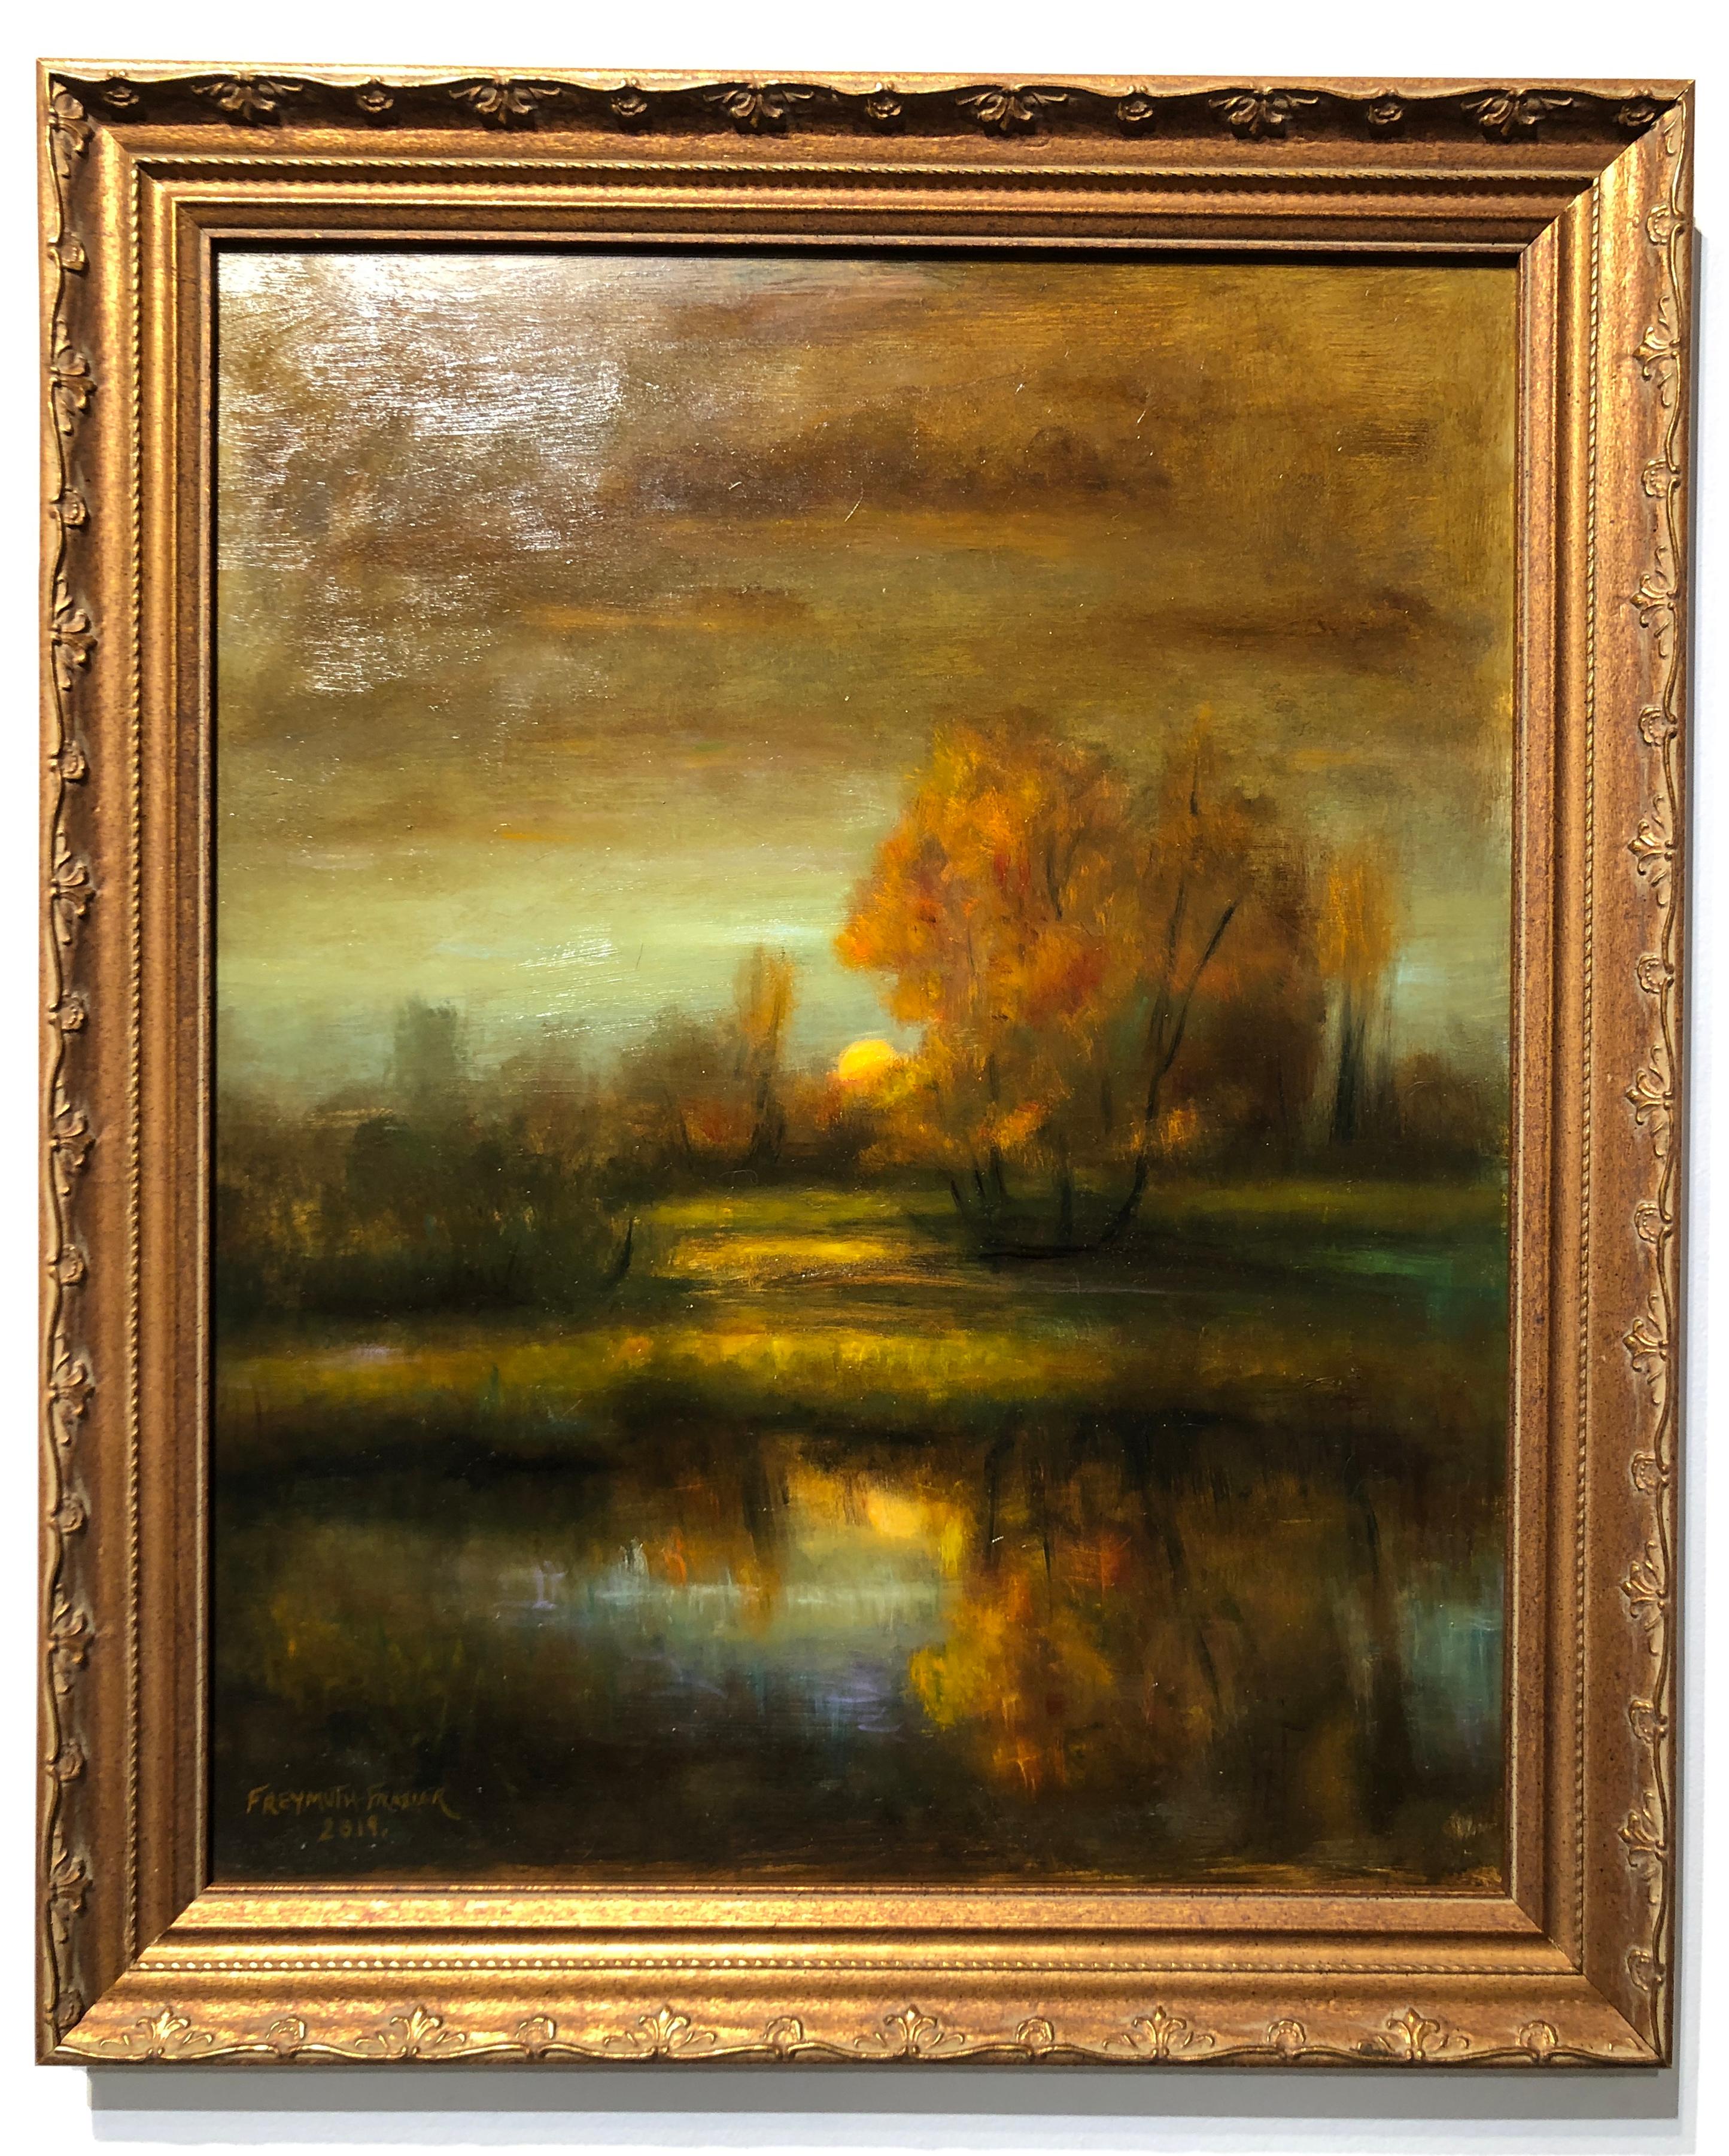 Hand-Painted Falling Reflections Original Oil Painting, Soft Light Reflecting Romantic Colors